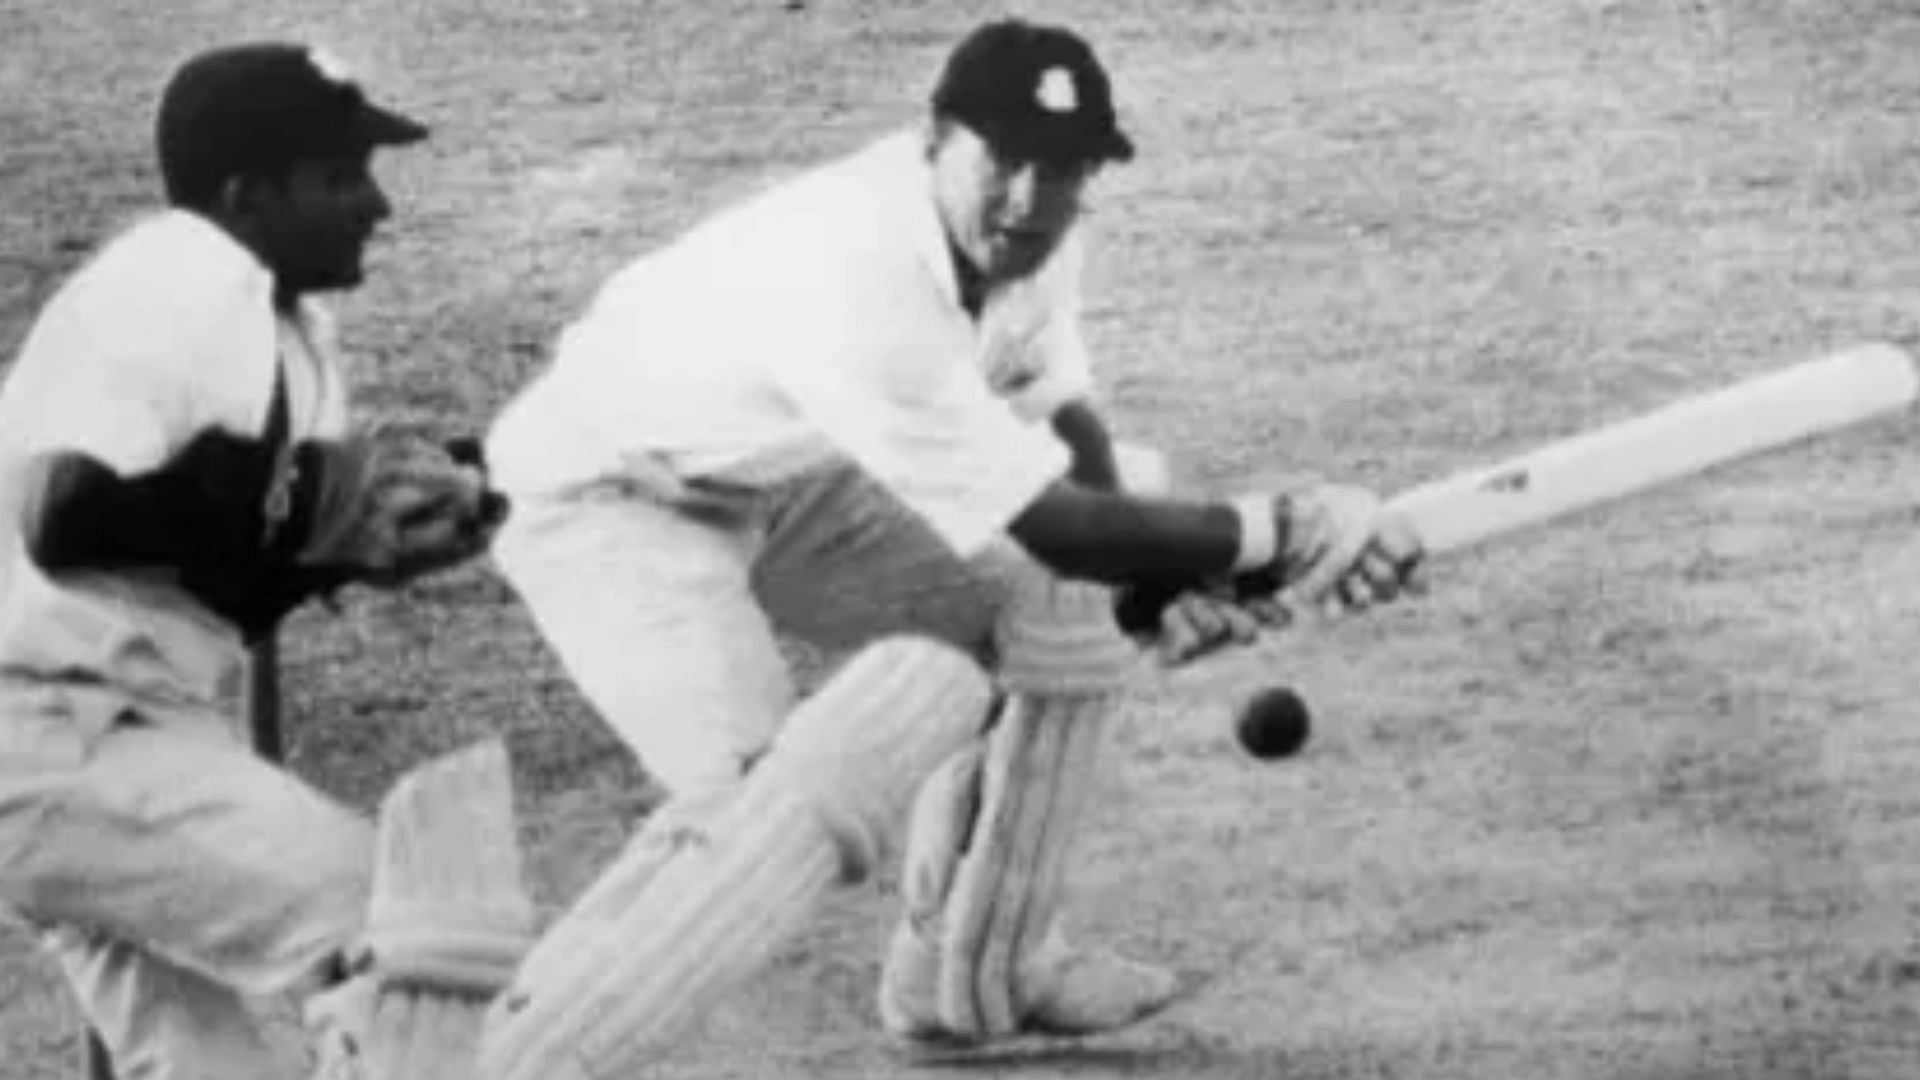 Geoffrey Boycott during his match-winning knock of 80 in the 2nd innings of the Test